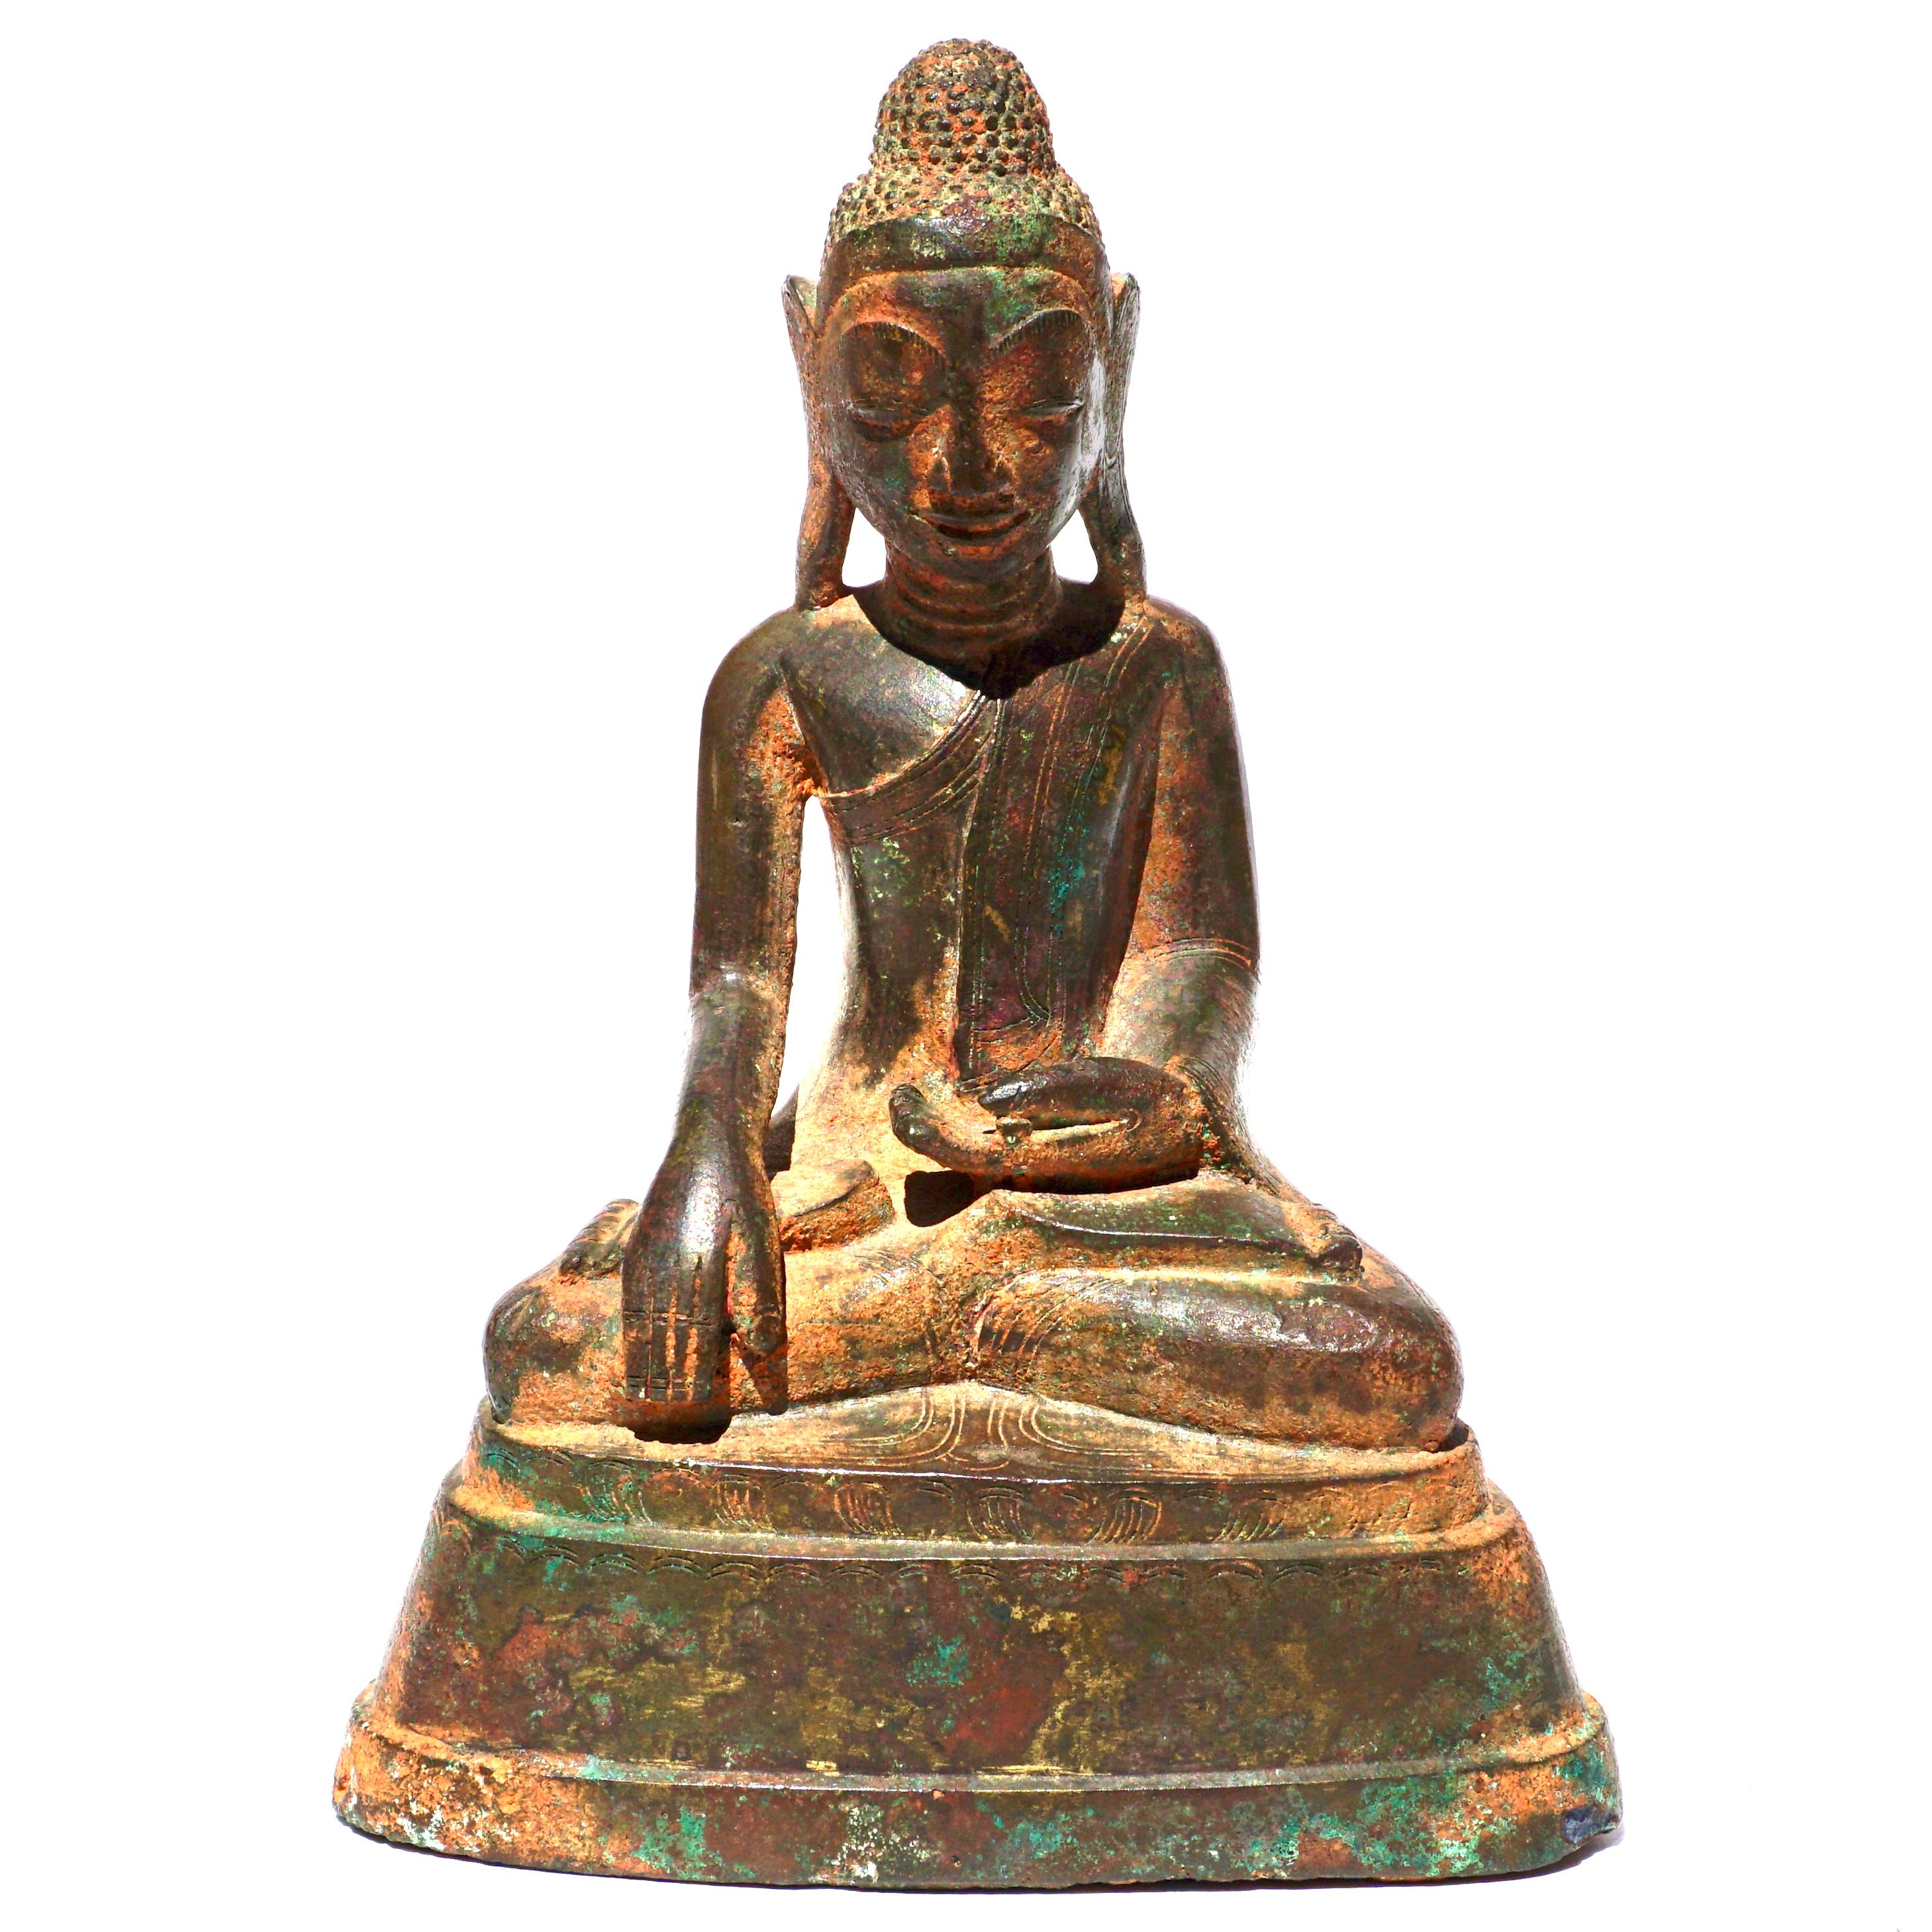 Khmer Bronze Buddha
Cambodia, 17th/18thC 
Copper and Bronze sculpture representing seated Buddha with traces of gilding. Writings on verso; possibly a prayer.

Dimensions: Height 6 1/4 inches (15.8 cm)}

AVANTIQUES is dedicated to providing an